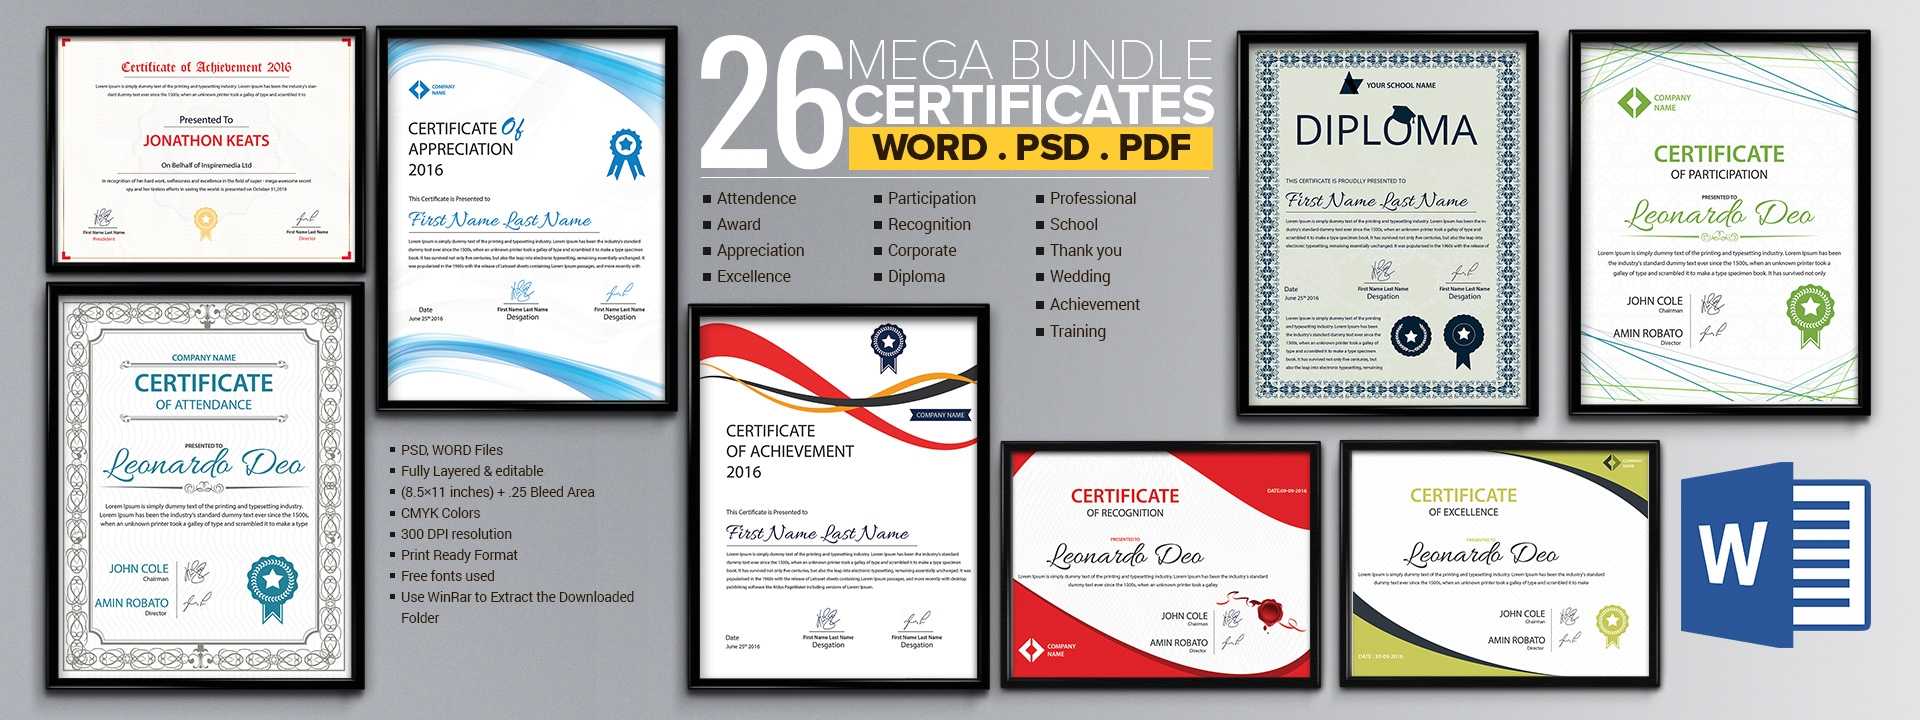 Word Certificate Template - 53+ Free Download Samples For Free Certificate Templates For Word 2007